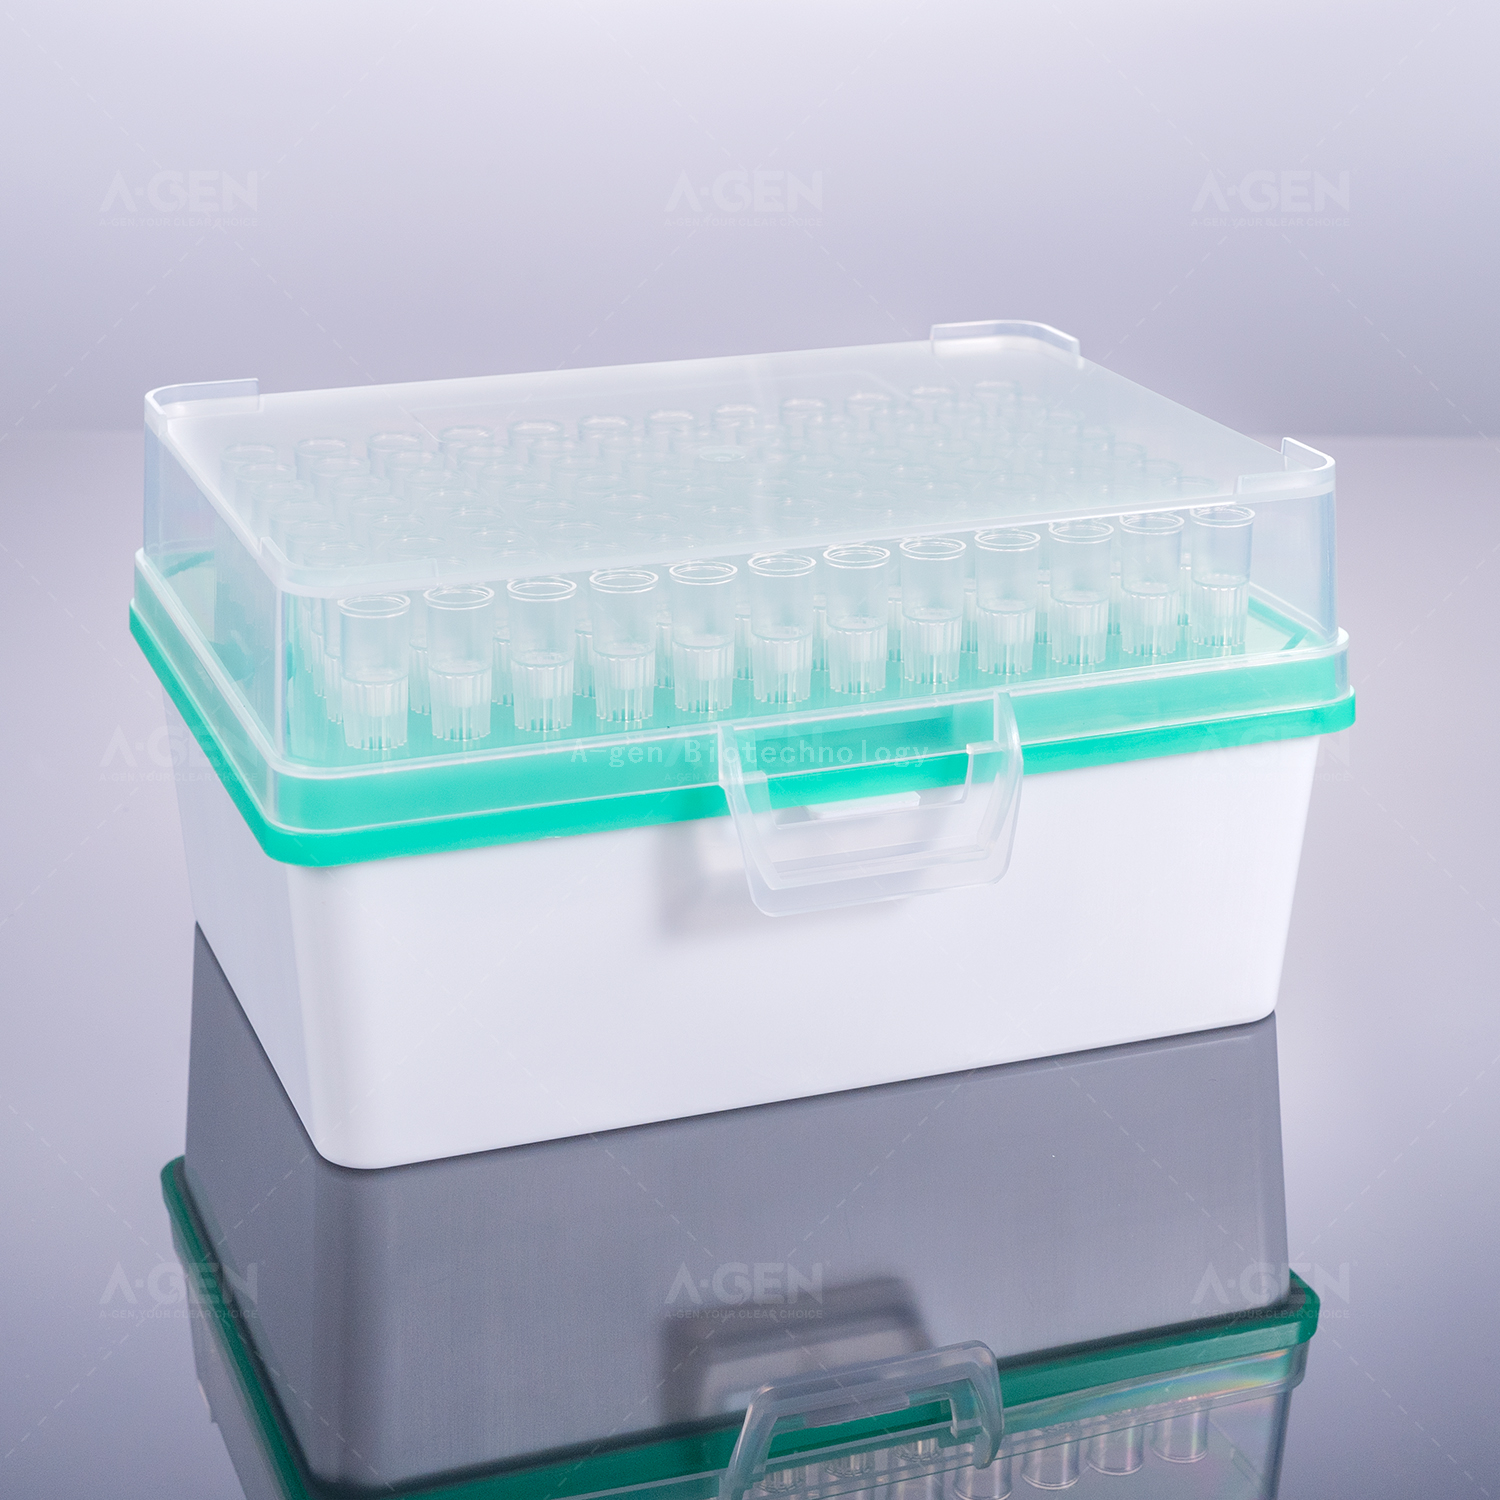 Sterilization Low Retention 200uLtransparent Filter LTS Tips with Packed in Rack